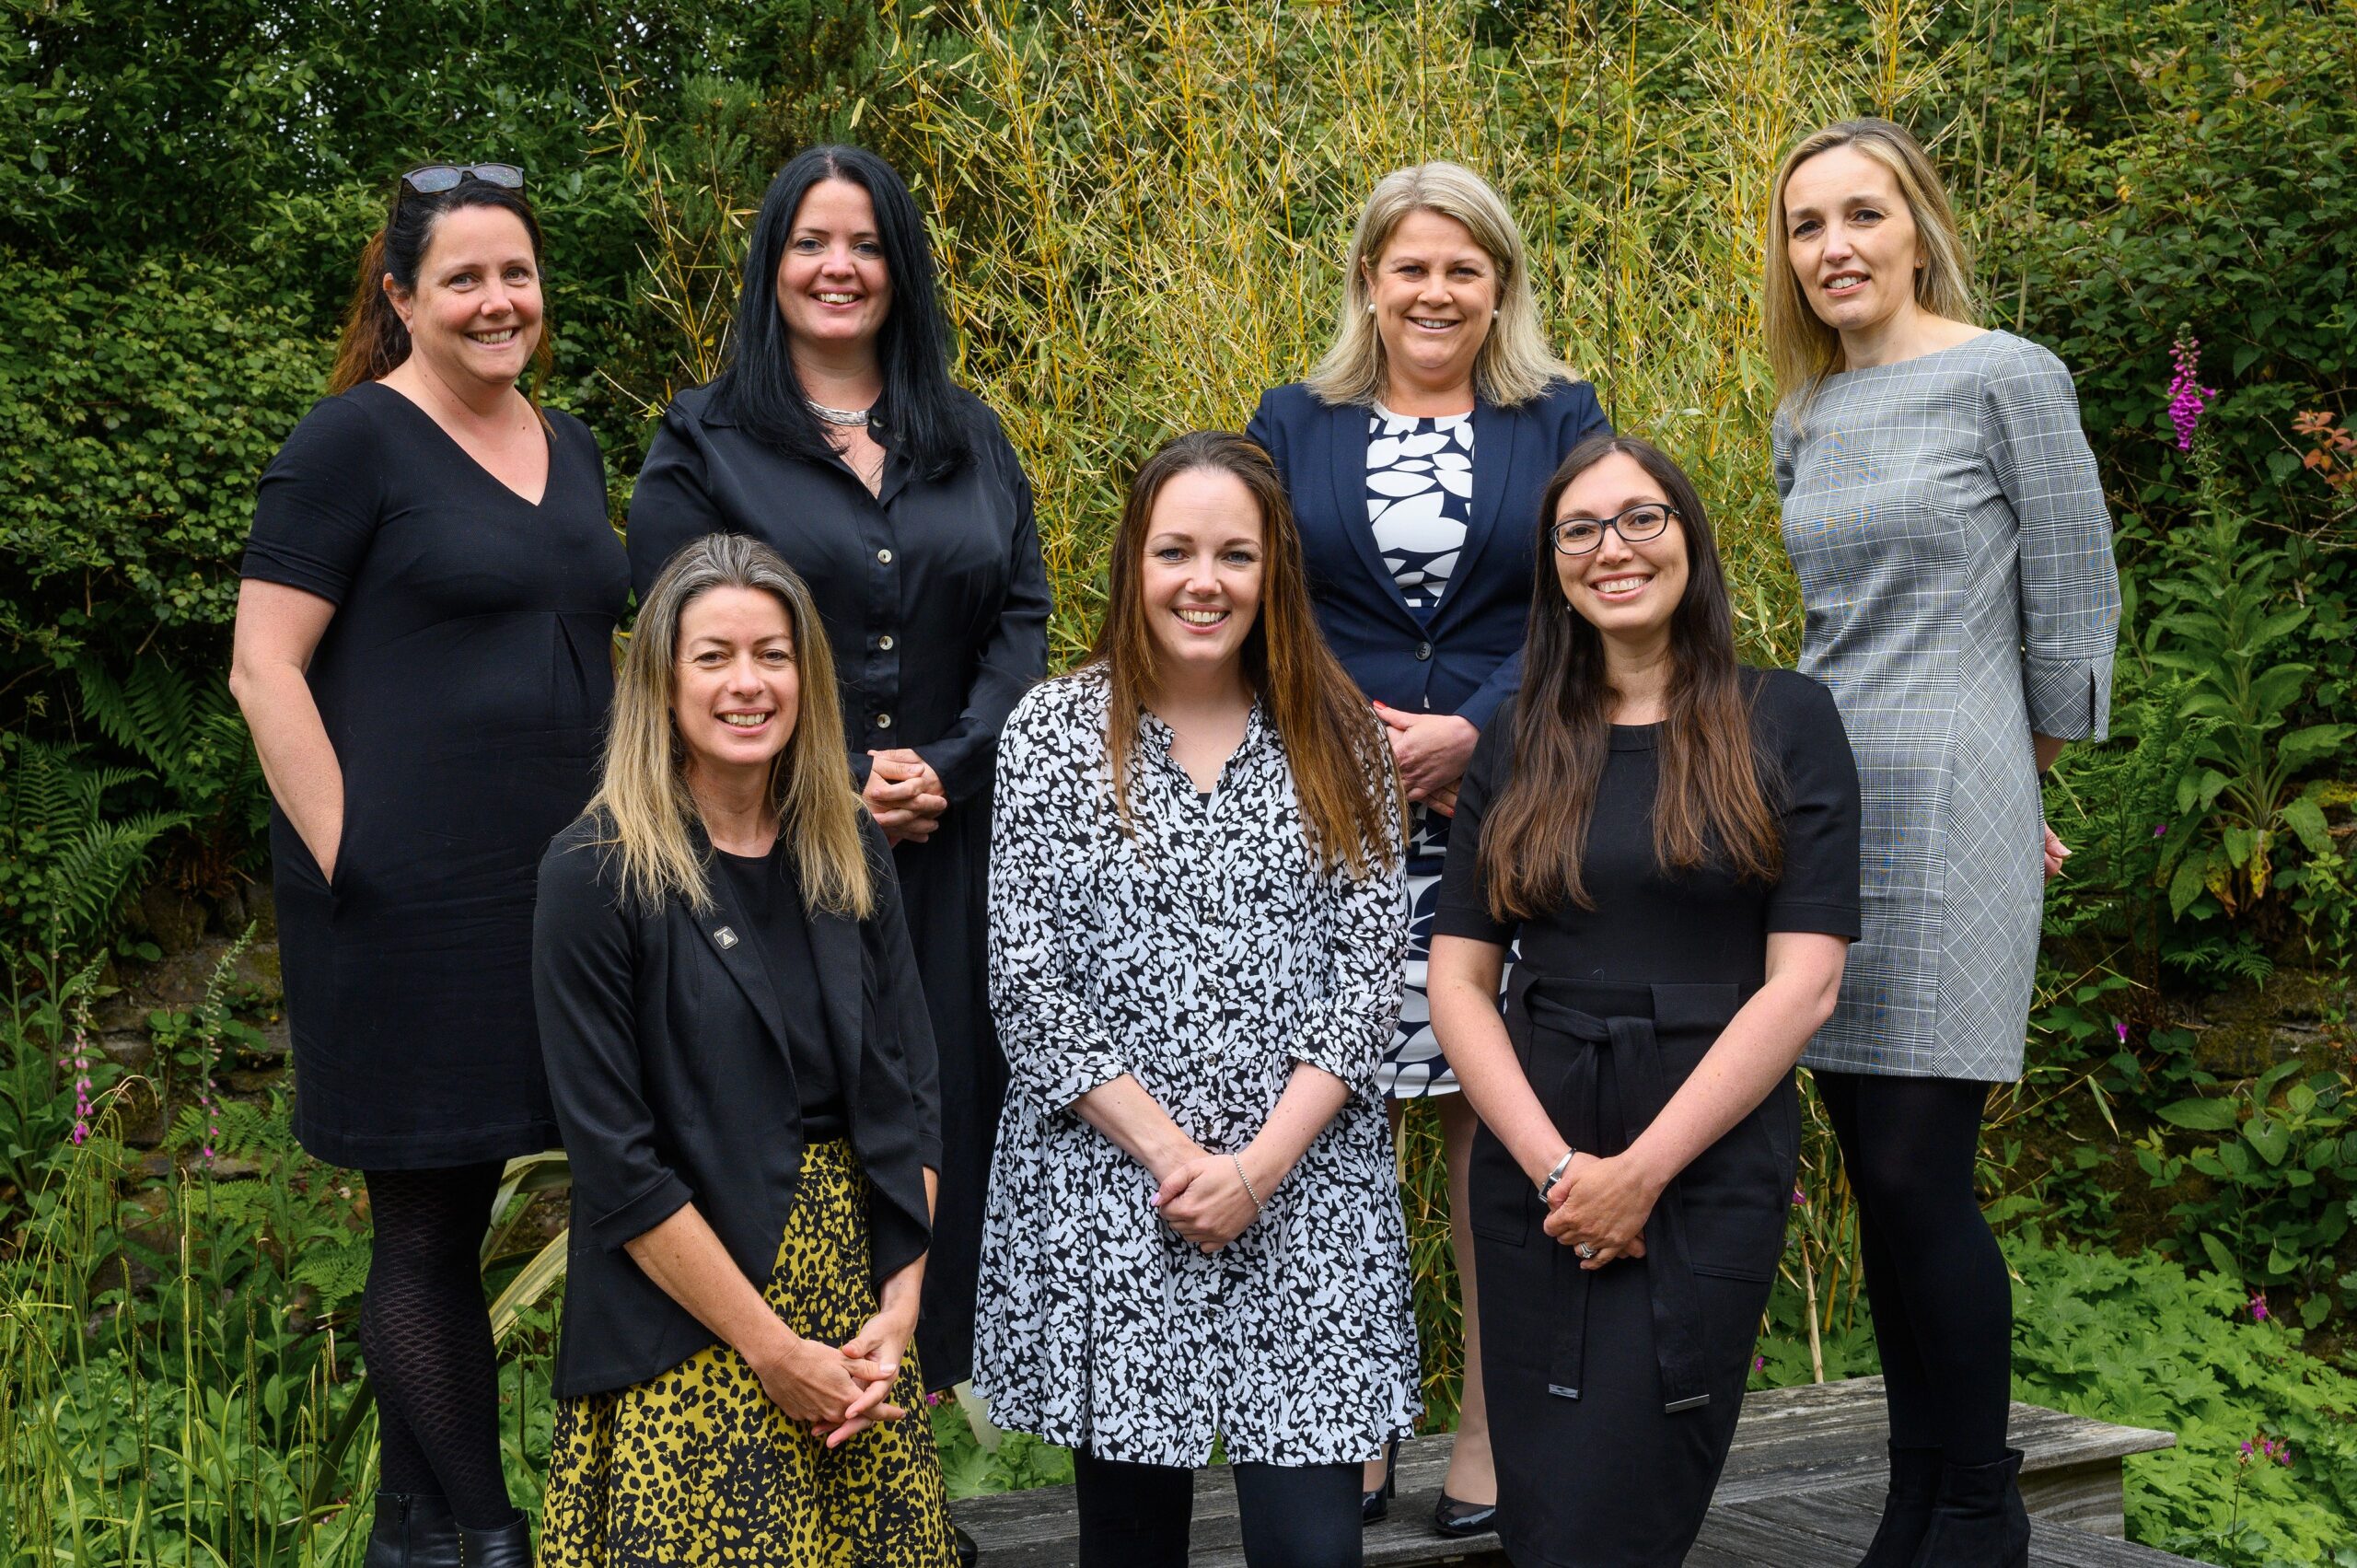 Seven new business owners appointed at South West legal firm Coodes